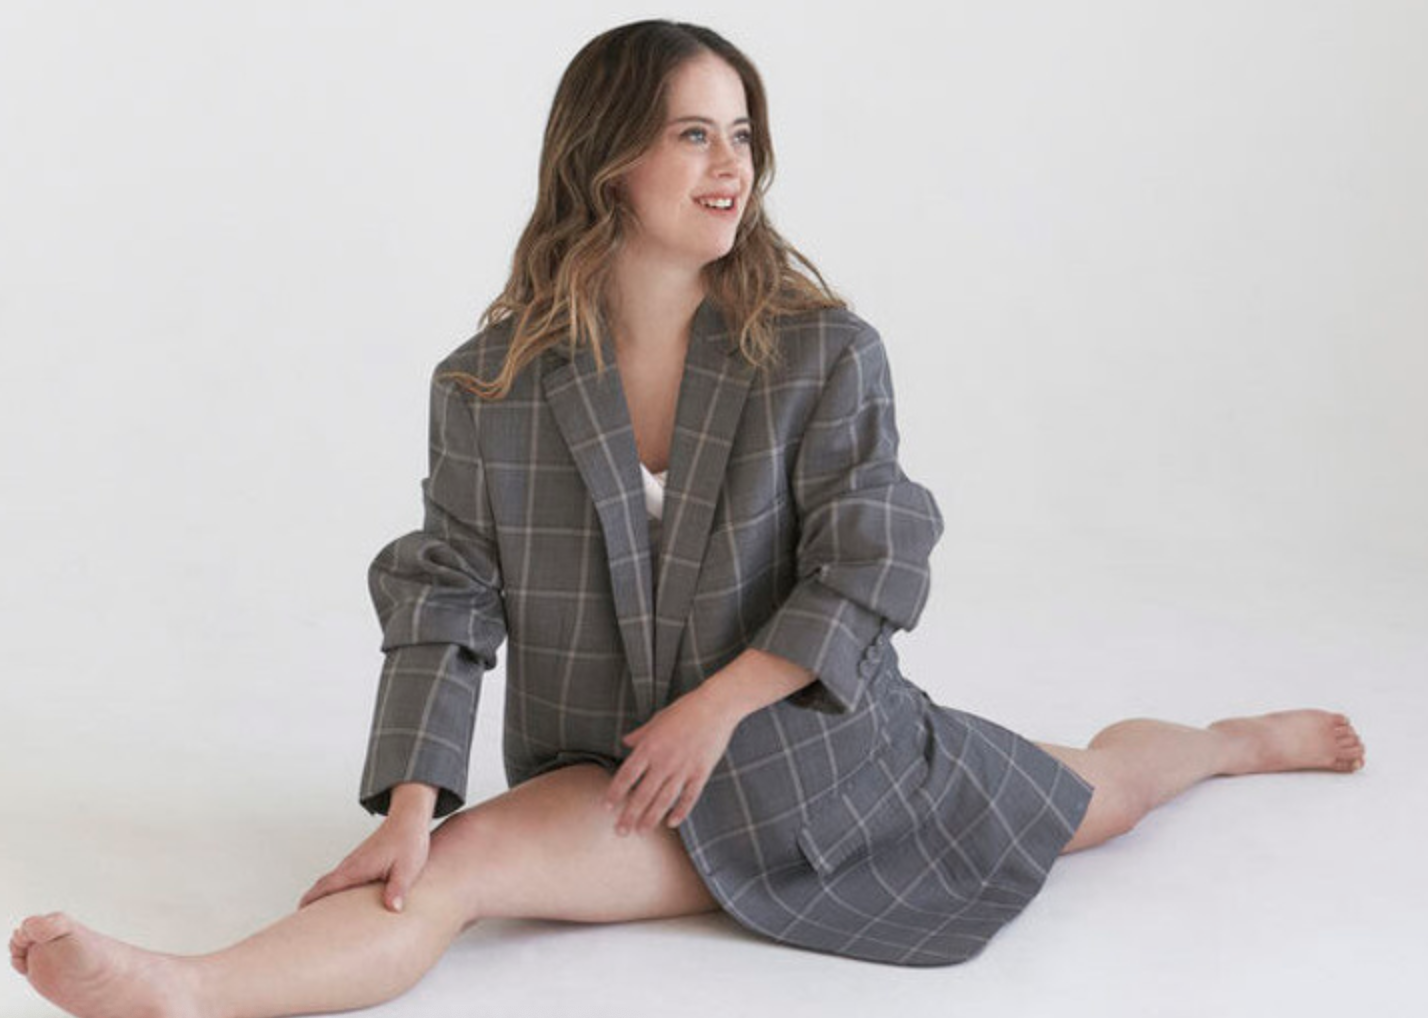 Model With Down Syndrome Proves A Lot About Real Beauty Sharesplosion